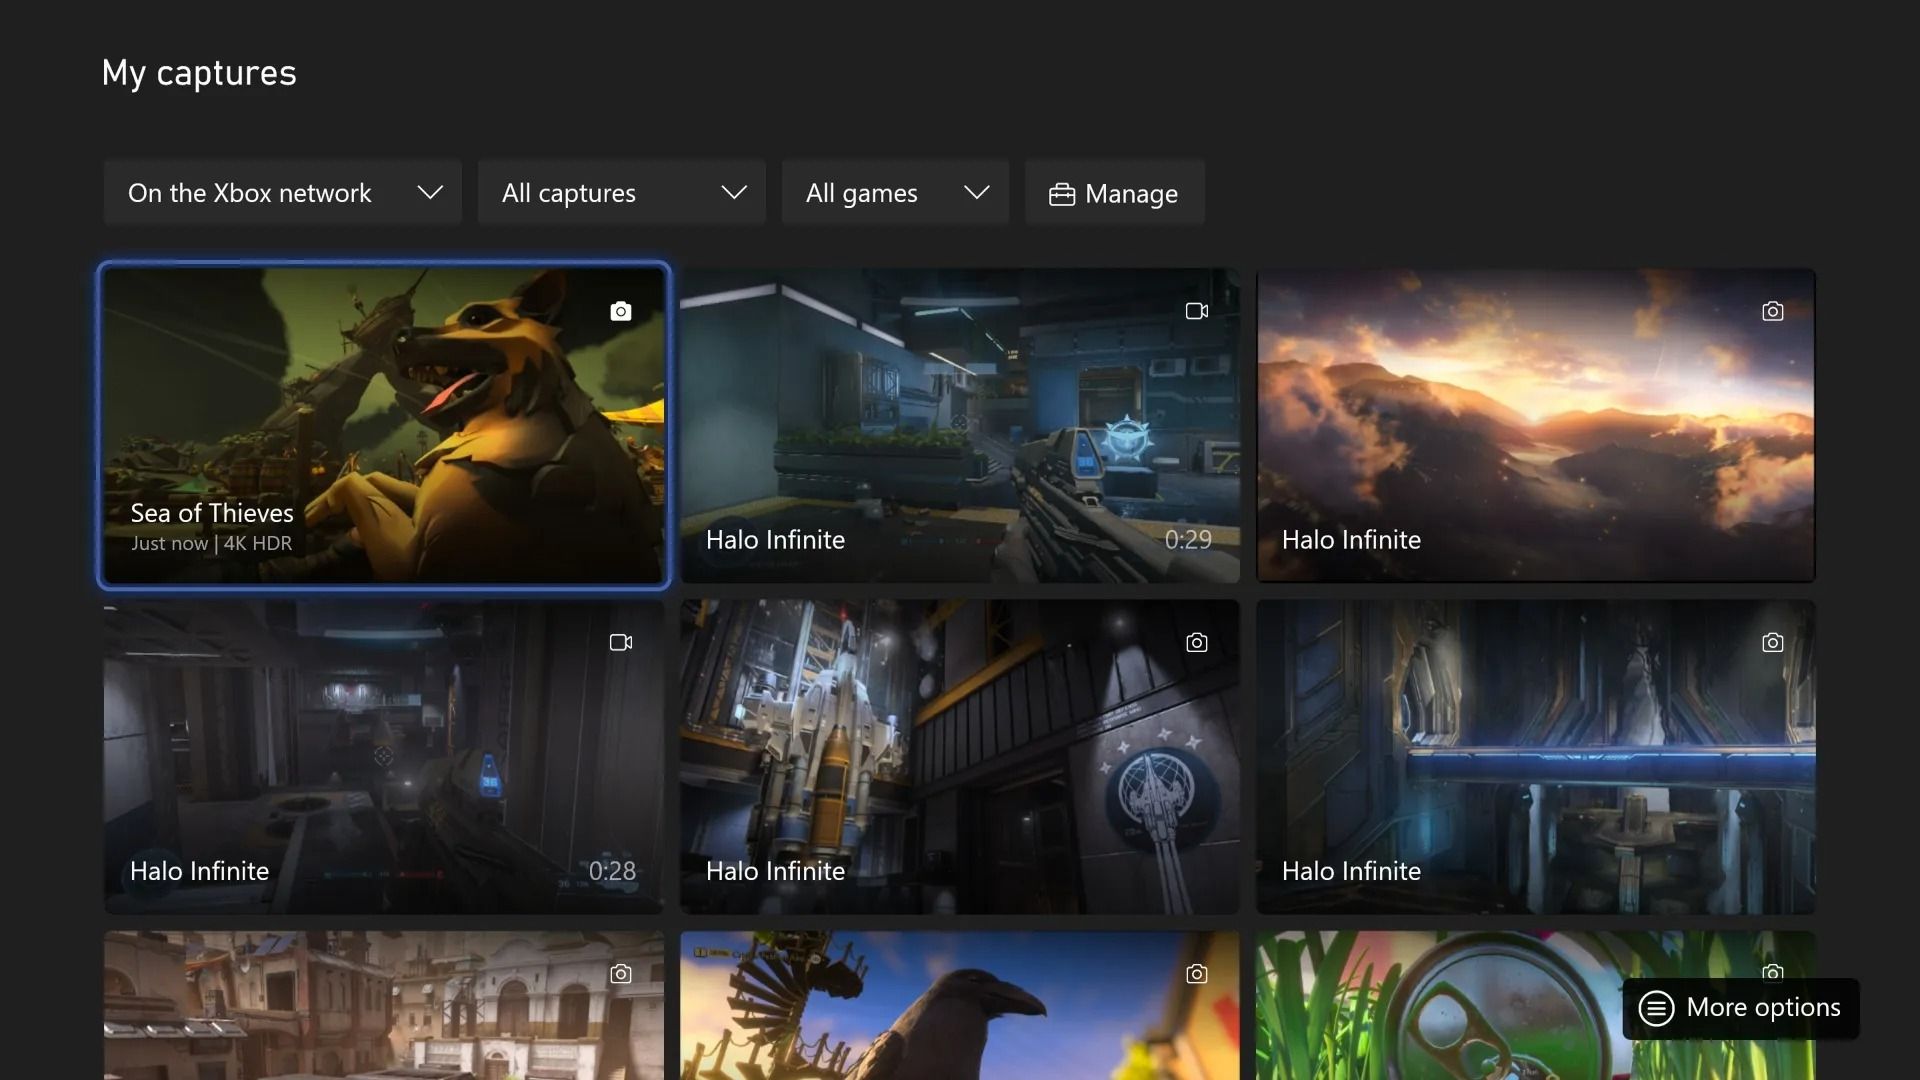 The new Xbox Capture app interface.